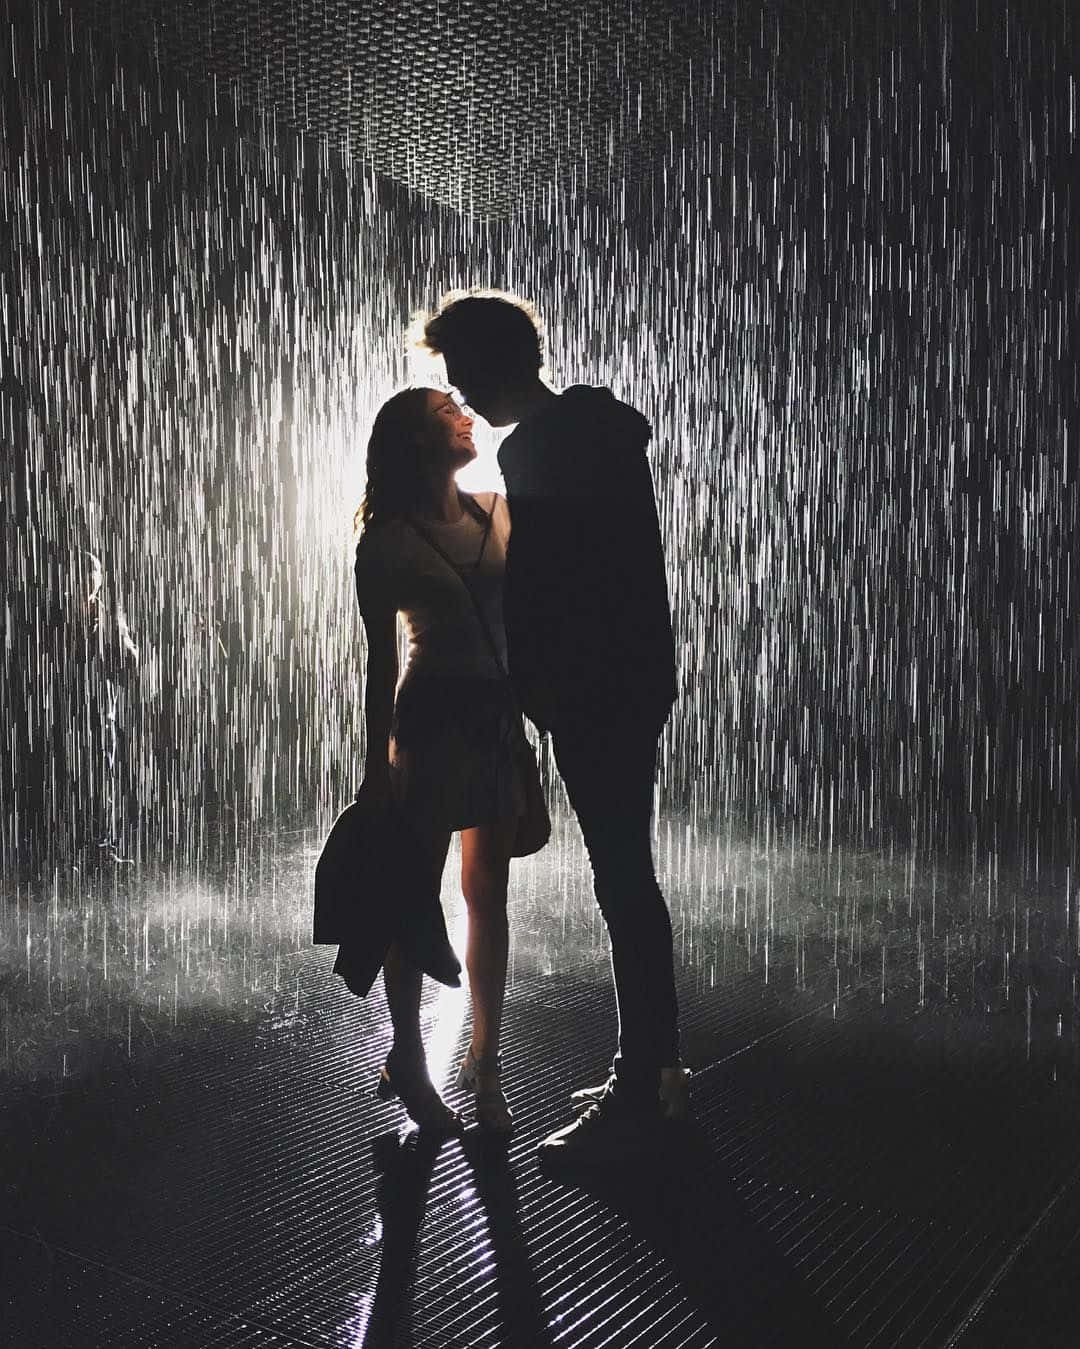 Holding on to love in the rain